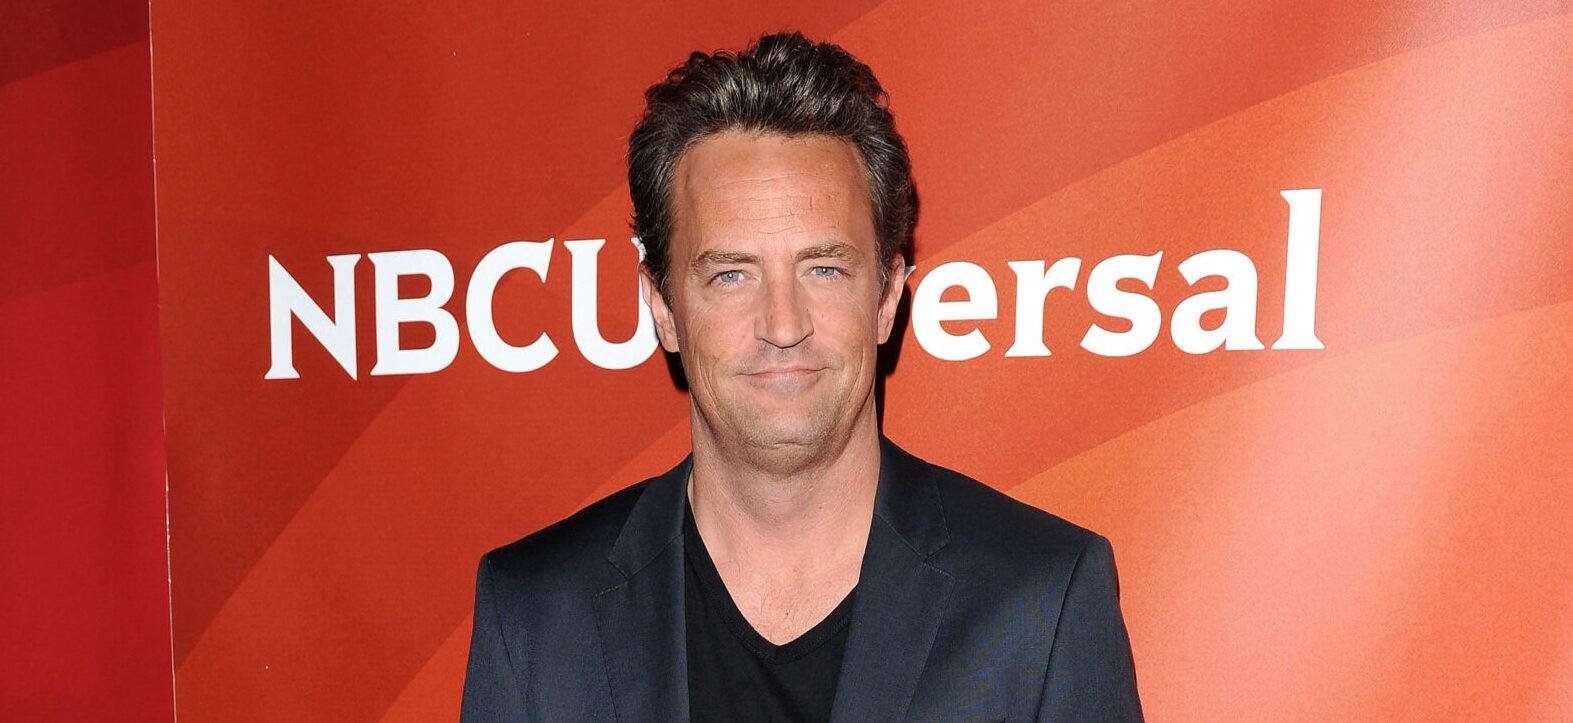 Matthew Perry’s Friend Claims Actor Was ‘Never Clean’ And ‘Lied’ About His Sobriety